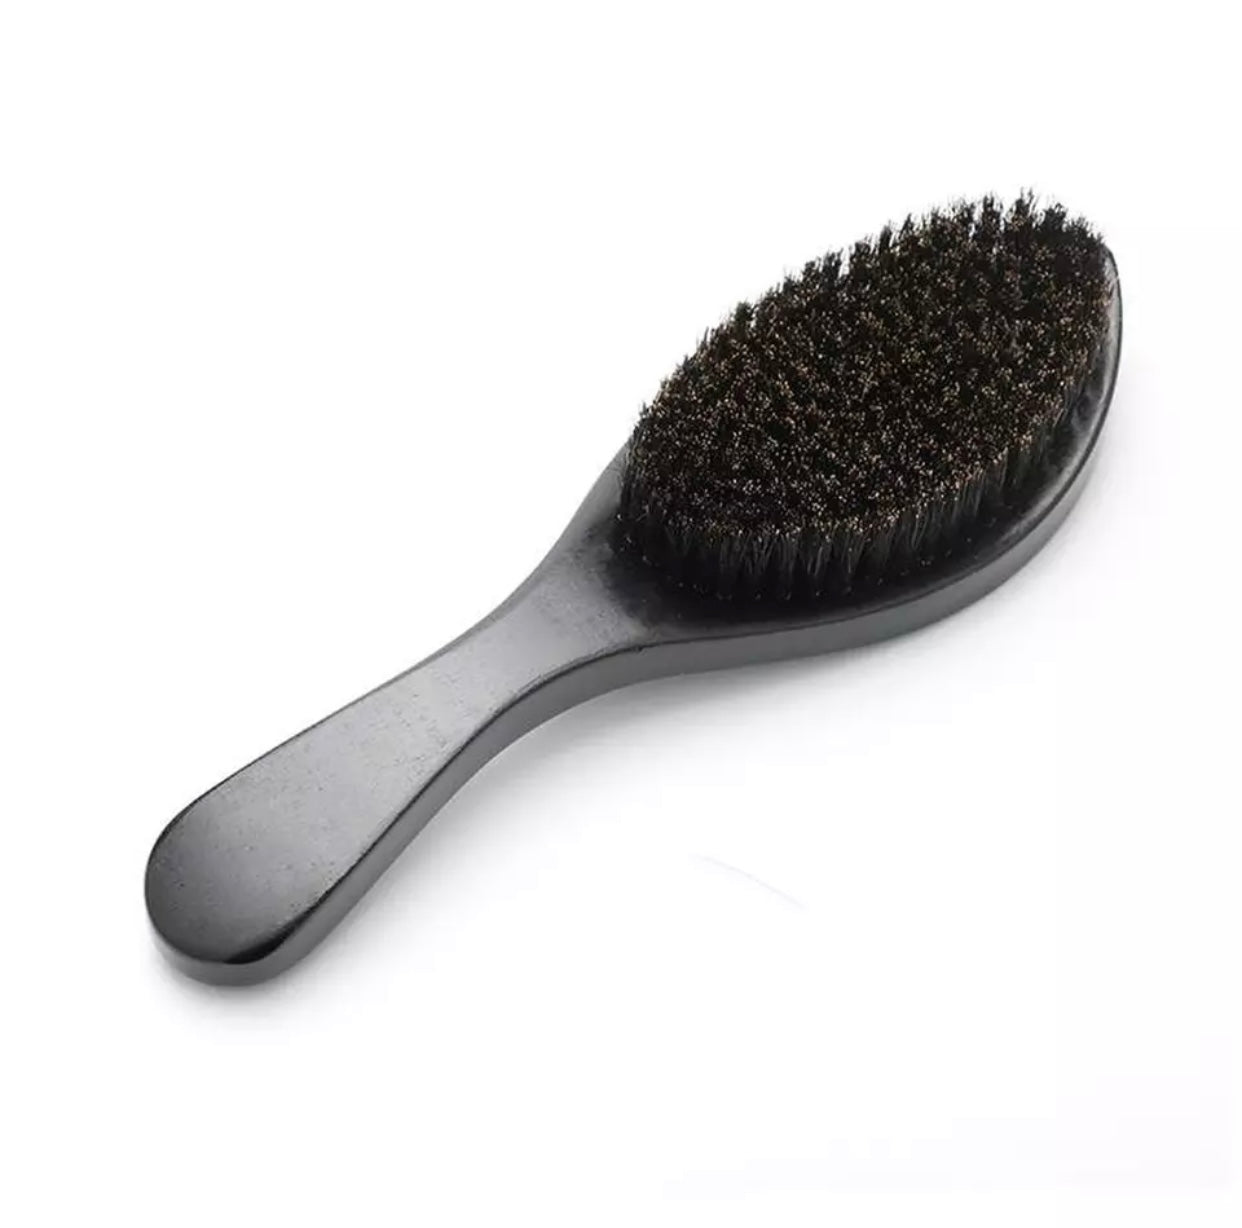 Curved Wave Brush - The Barbher Brand